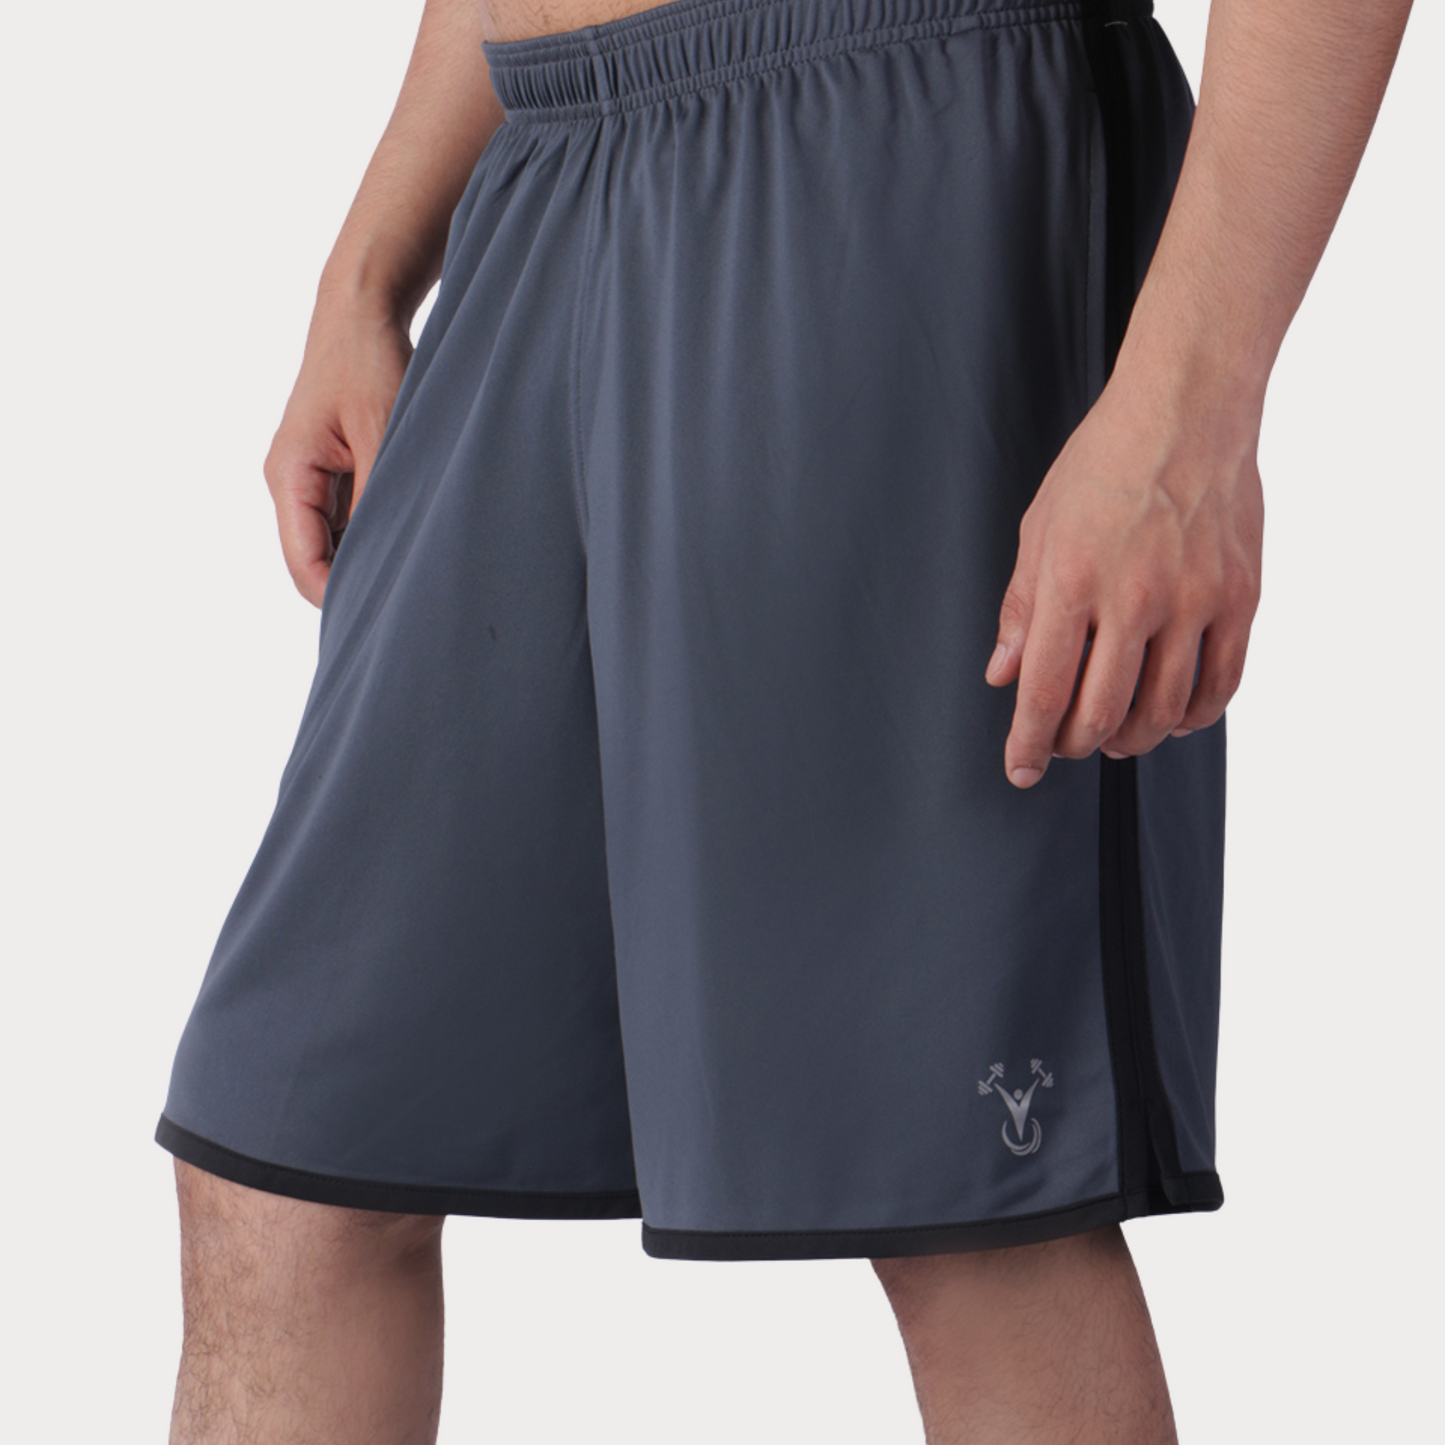 Shorts Activewear / Sportswear - Men's Classic Loose Fit Shorts - S / Slate Grey - Outperformer